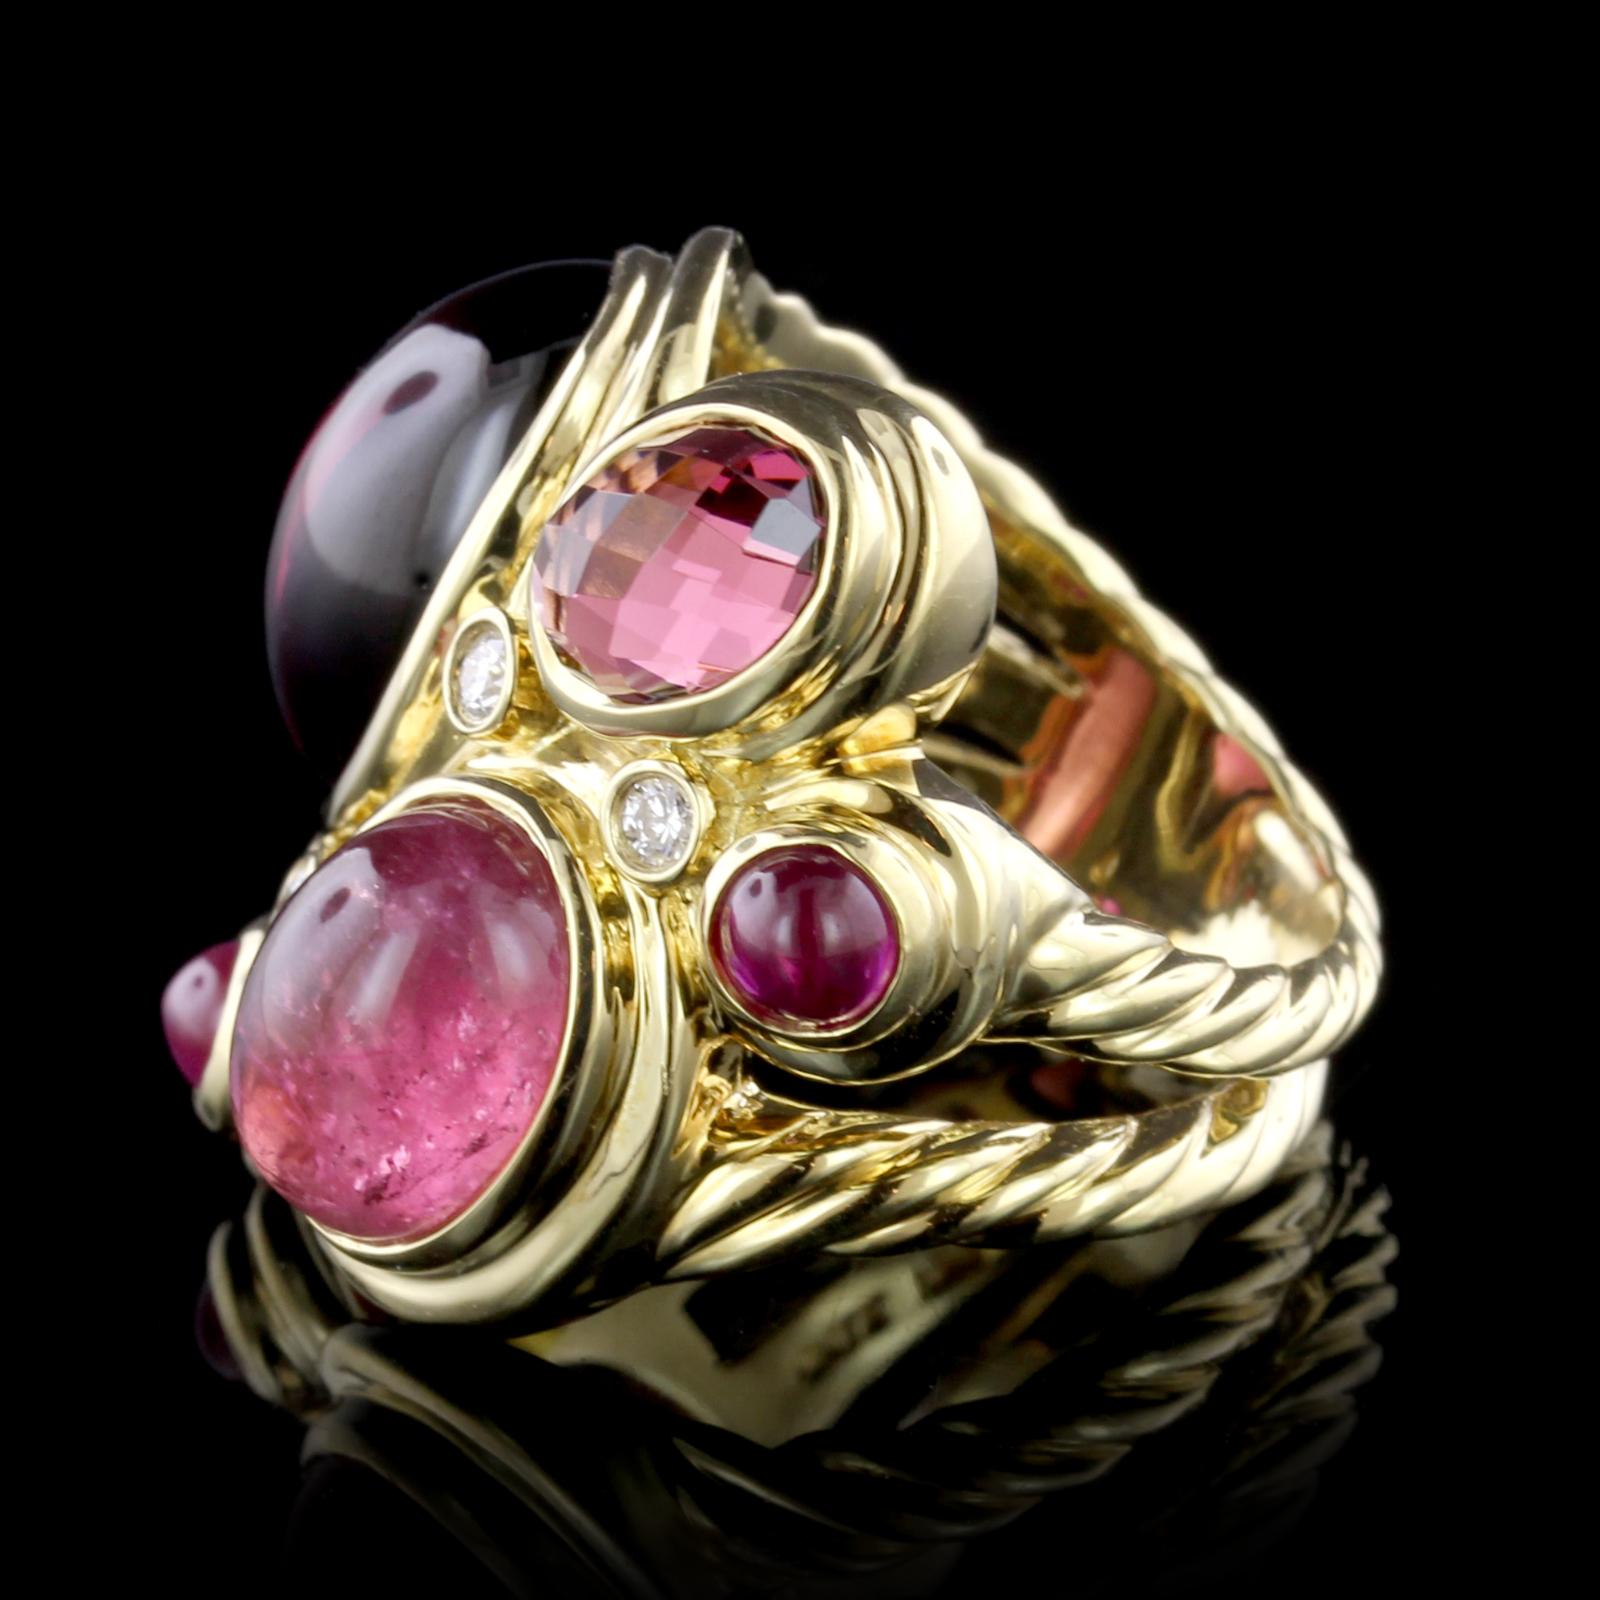 David Yurman 18K Yellow Gold Pink Tourmaline, Rhodolite Garnet and Diamond
Mosaic Ring. The ring is set with various colored pink toumalines and garnet,
further set with four full cut diamonds, approx. total wt. .11cts. size 7.